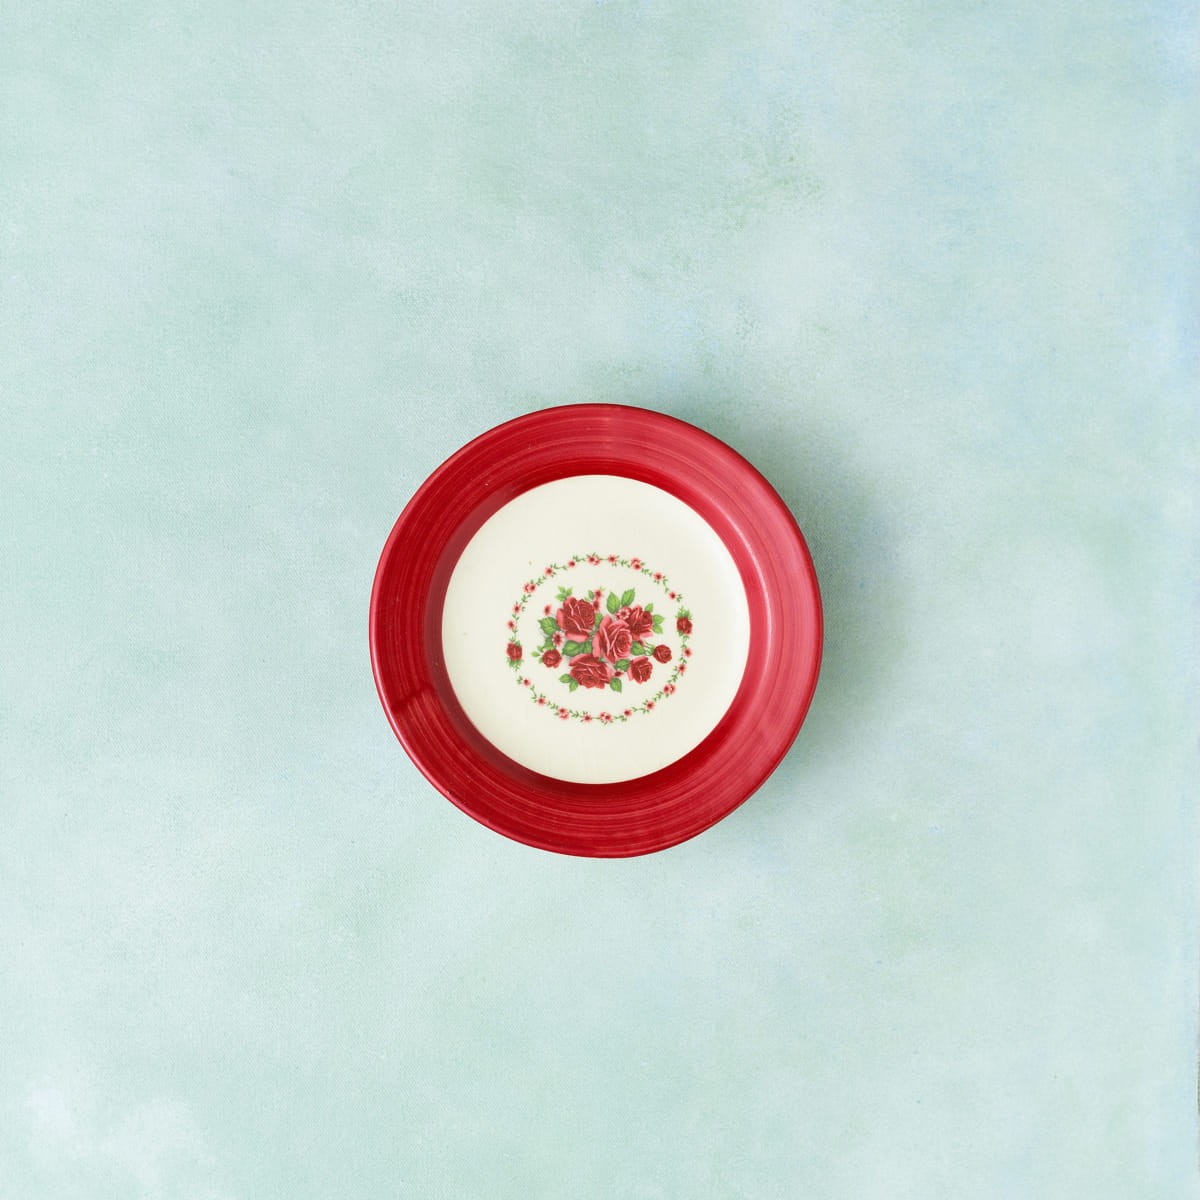 Floral Whispers in Red Wall Decor Ceramics Plate Small